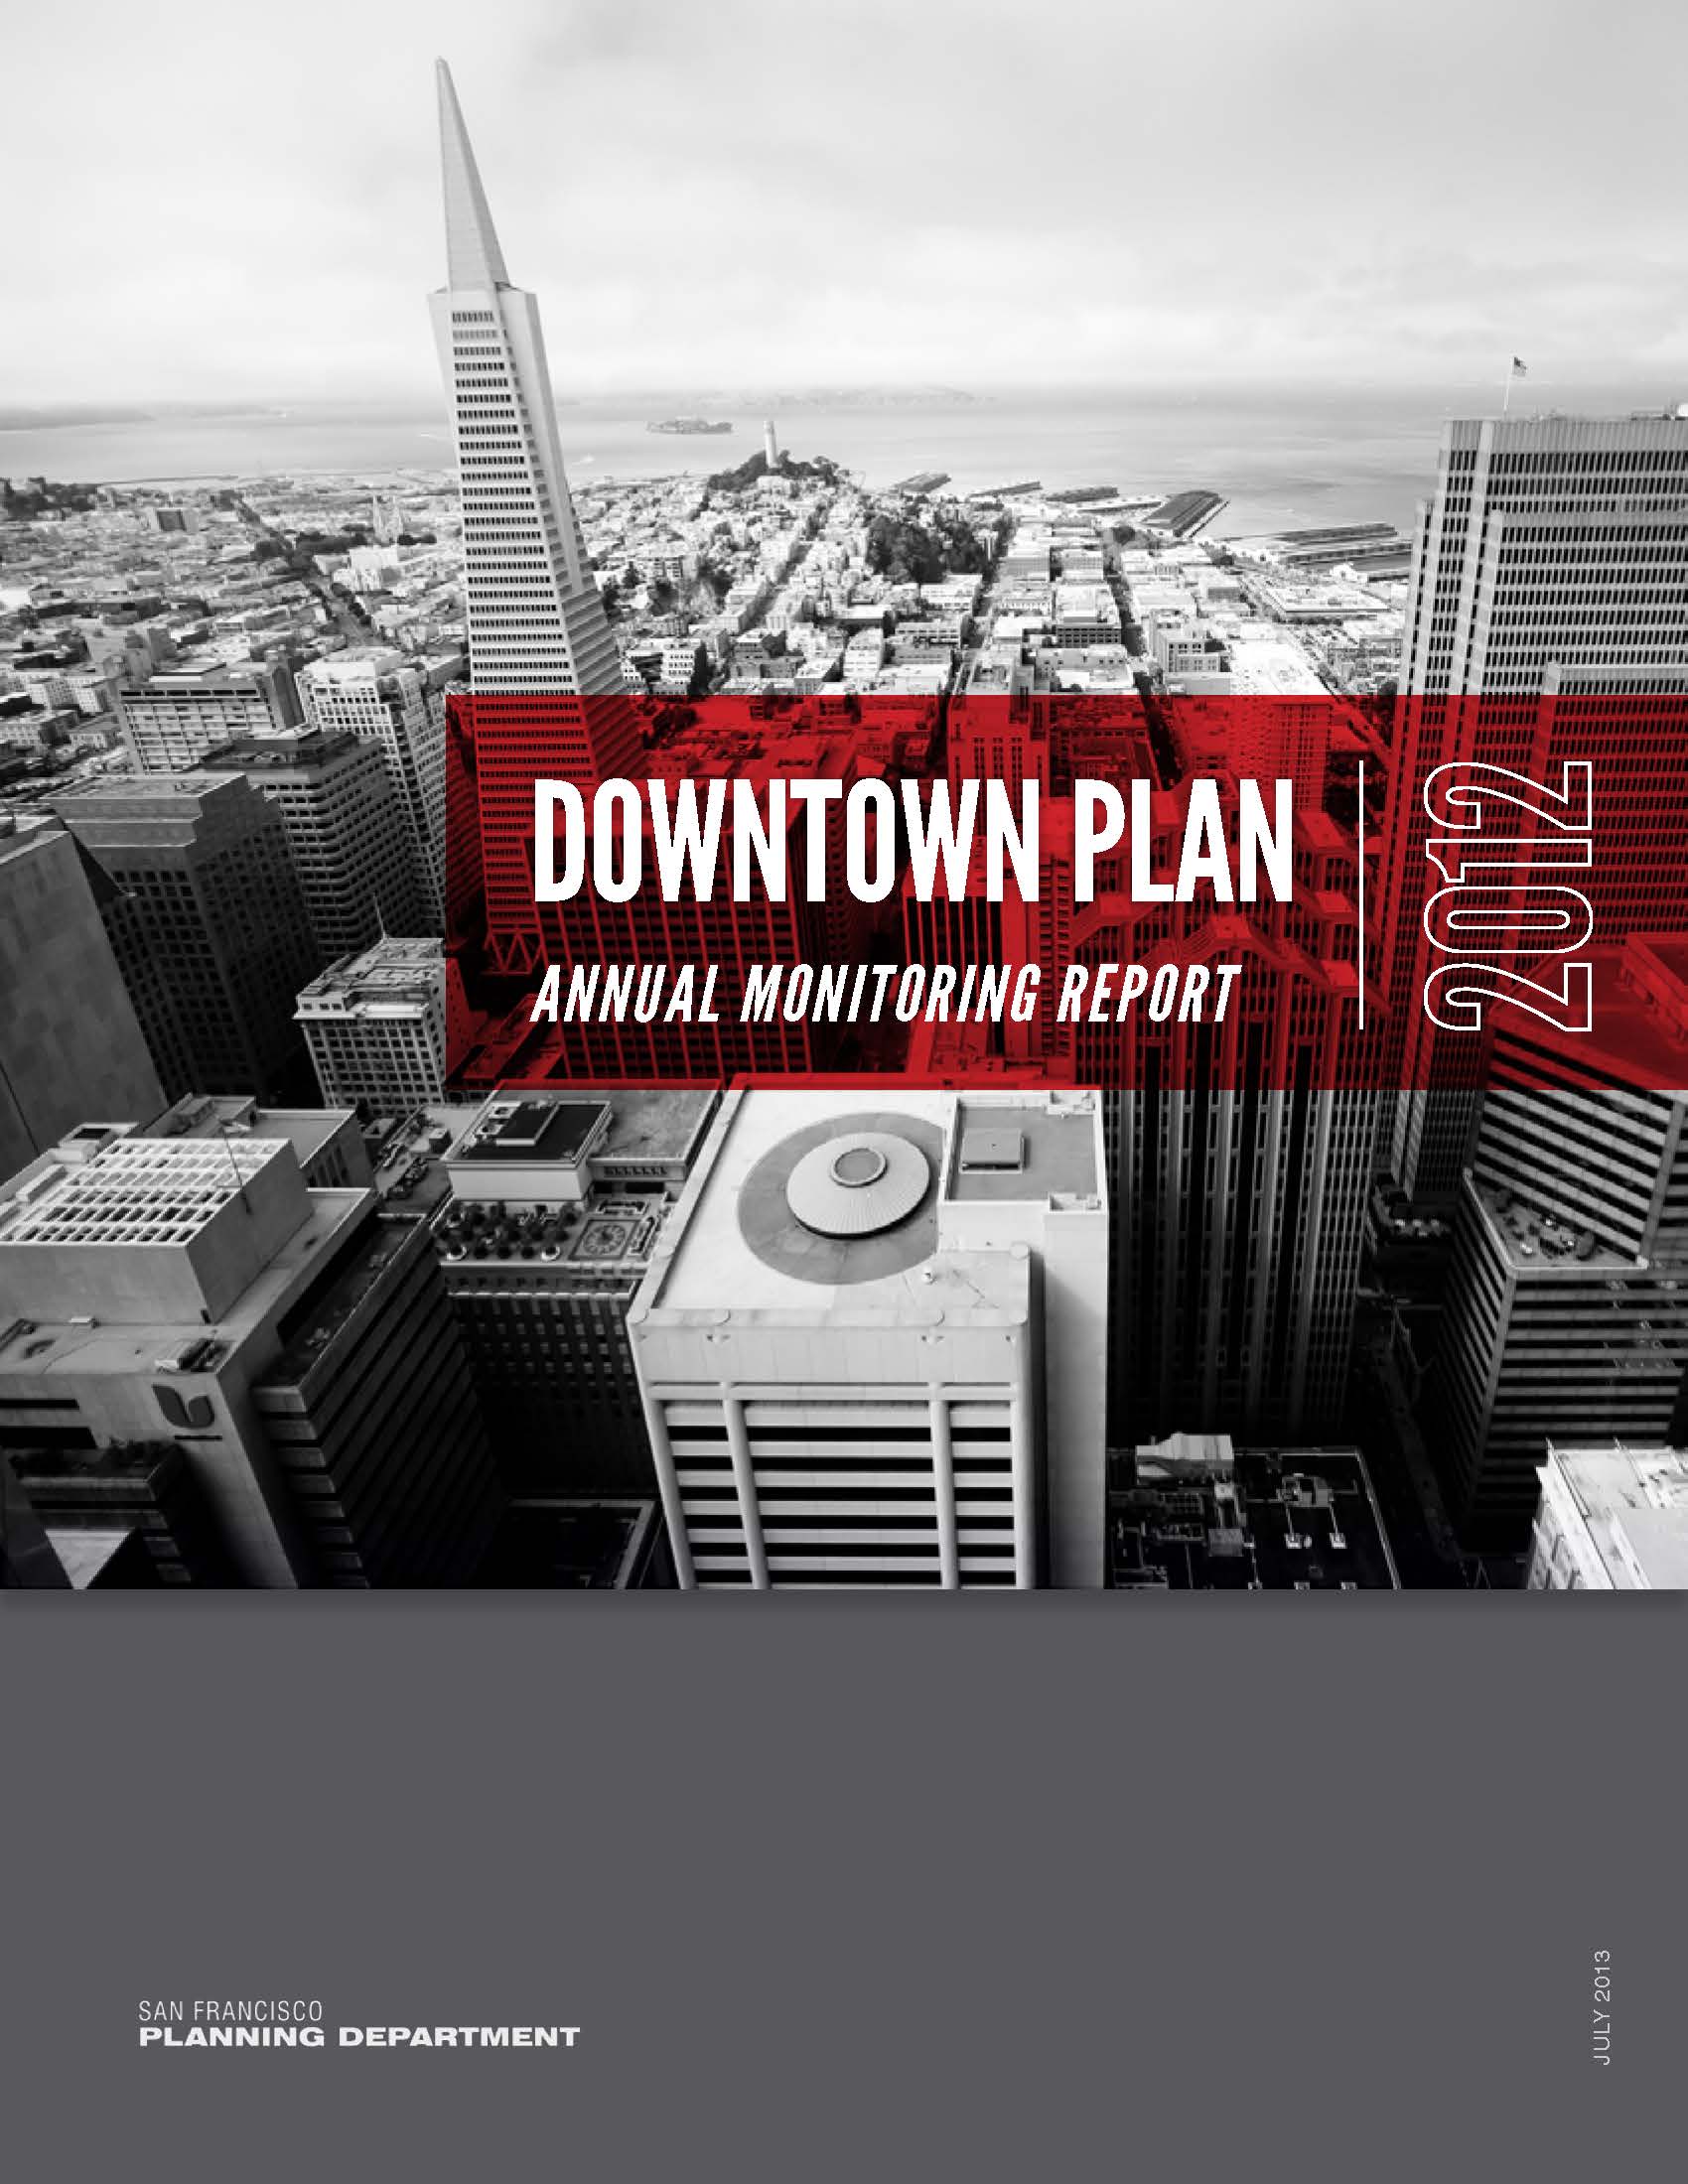 Cover Image for the Downtown Plan Monitoring Report 2012